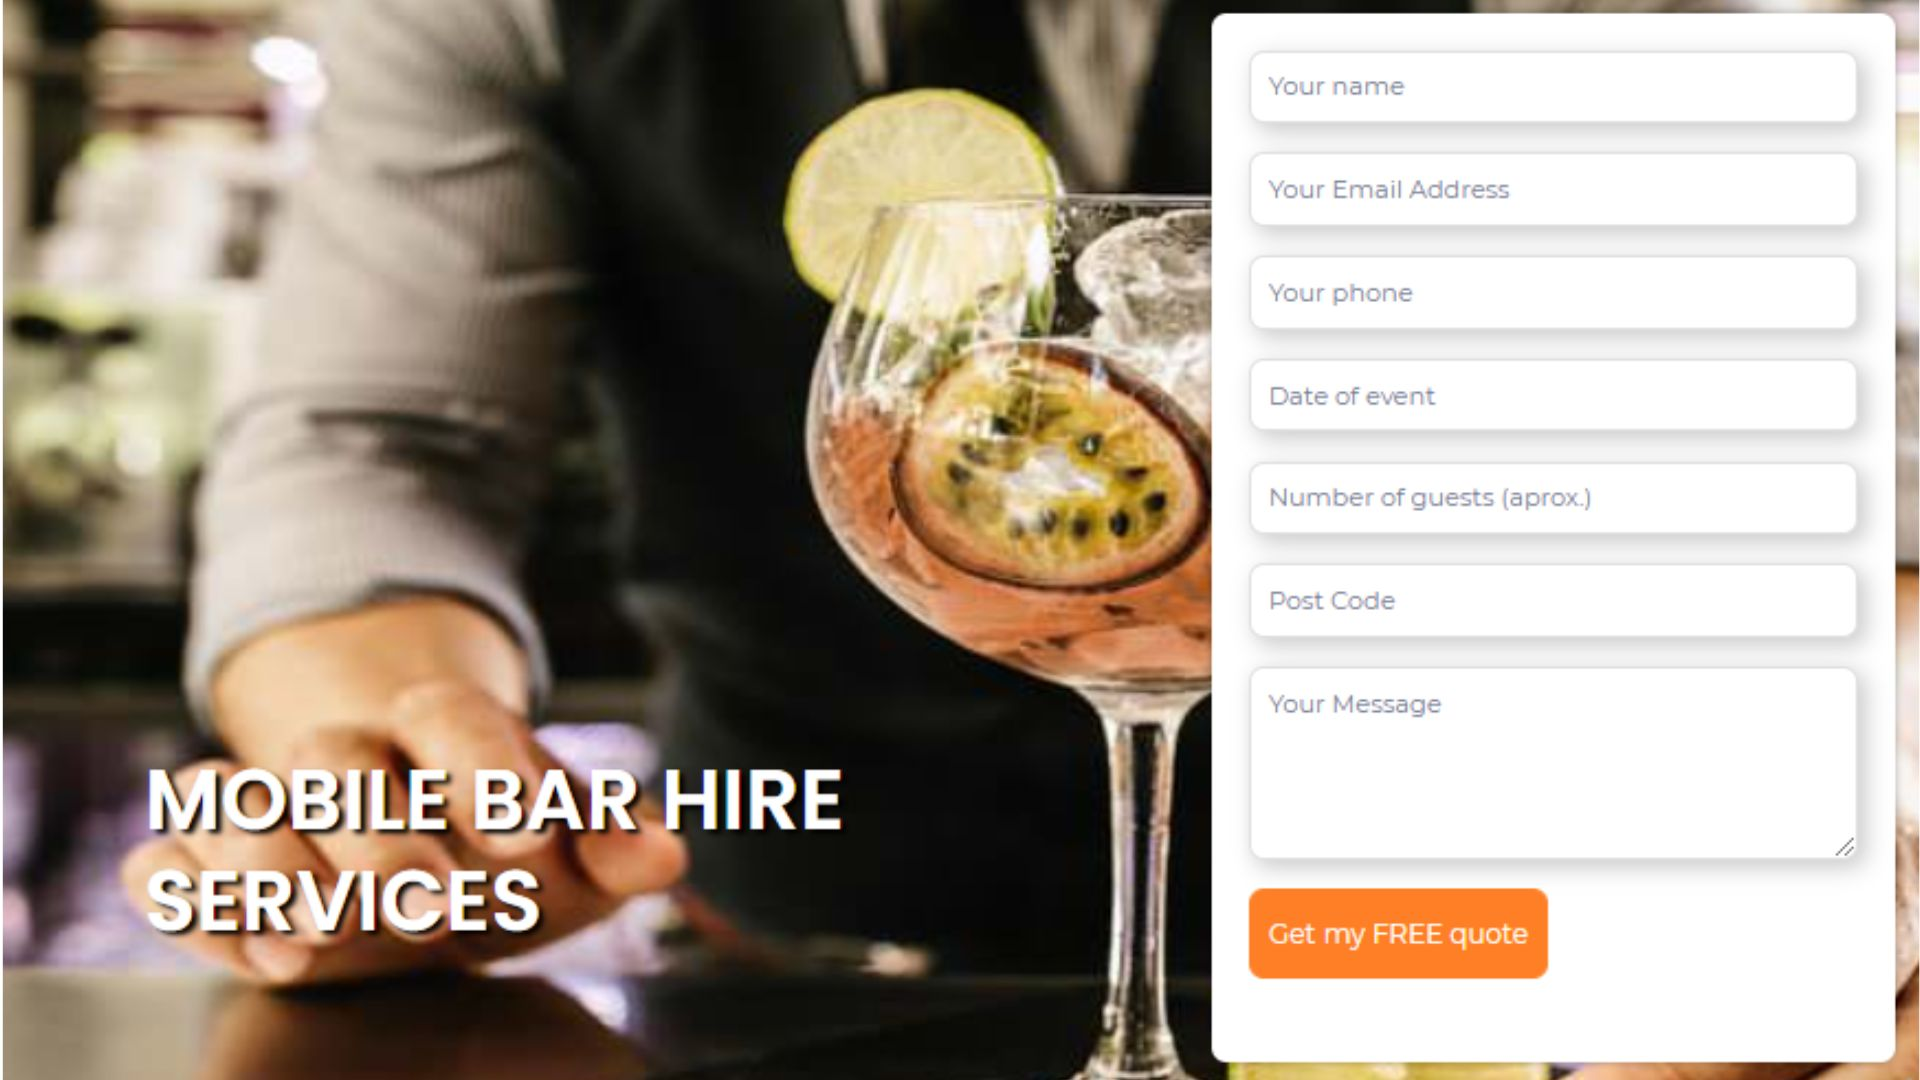 How Much Does Wedding Mobile Bar Hire Cost in London? -